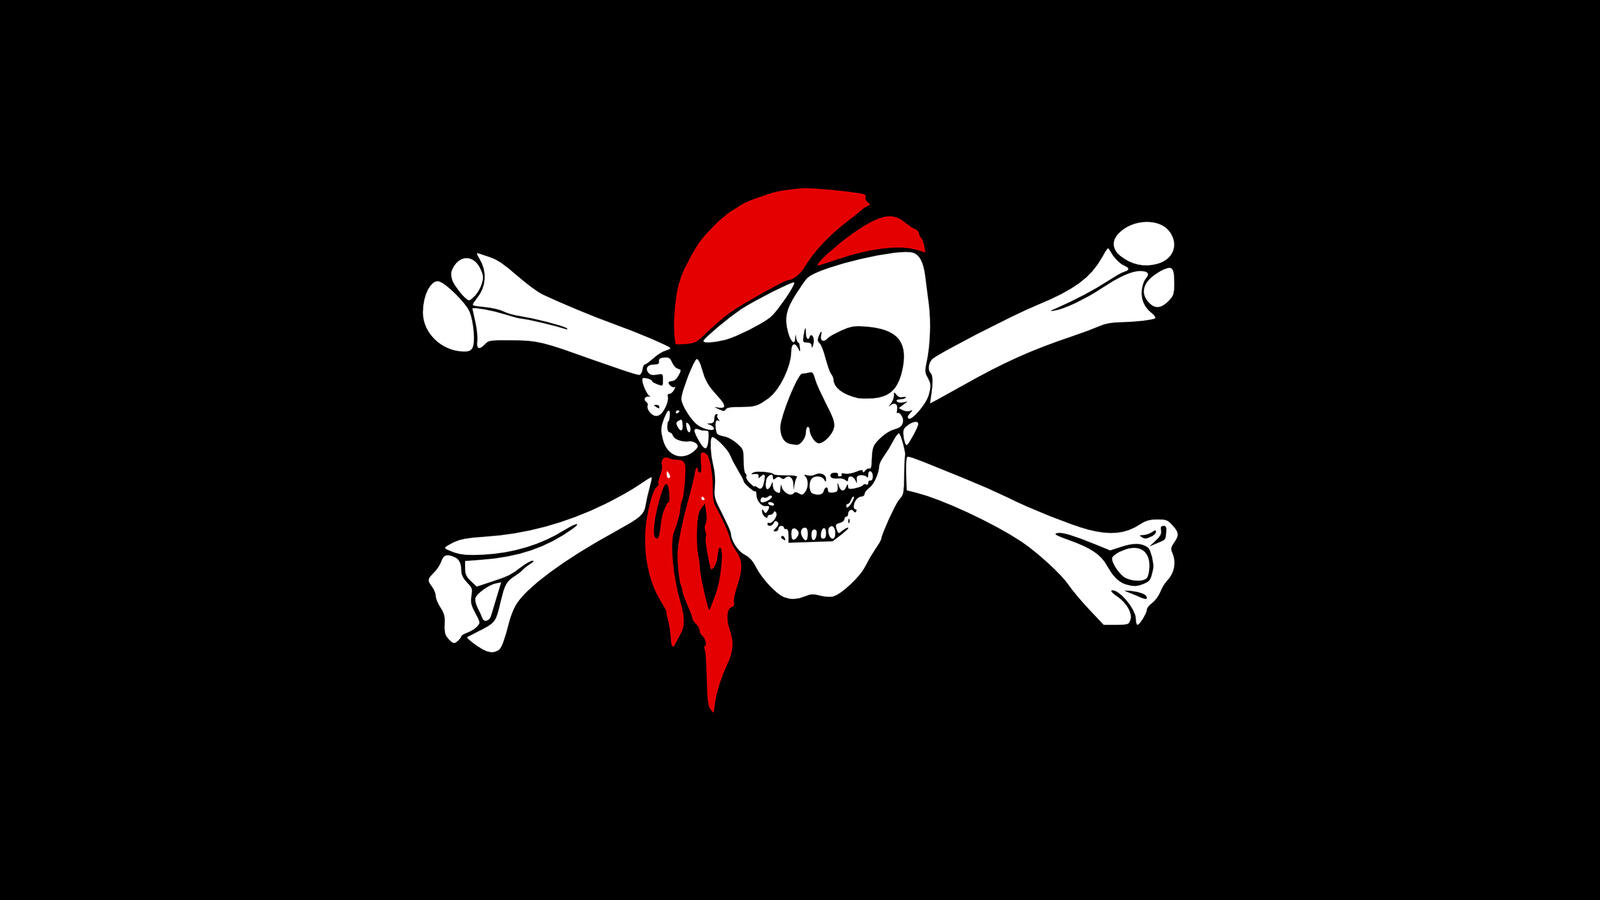 Free photo Picture of a pirate symbol in a red bandana on a black background